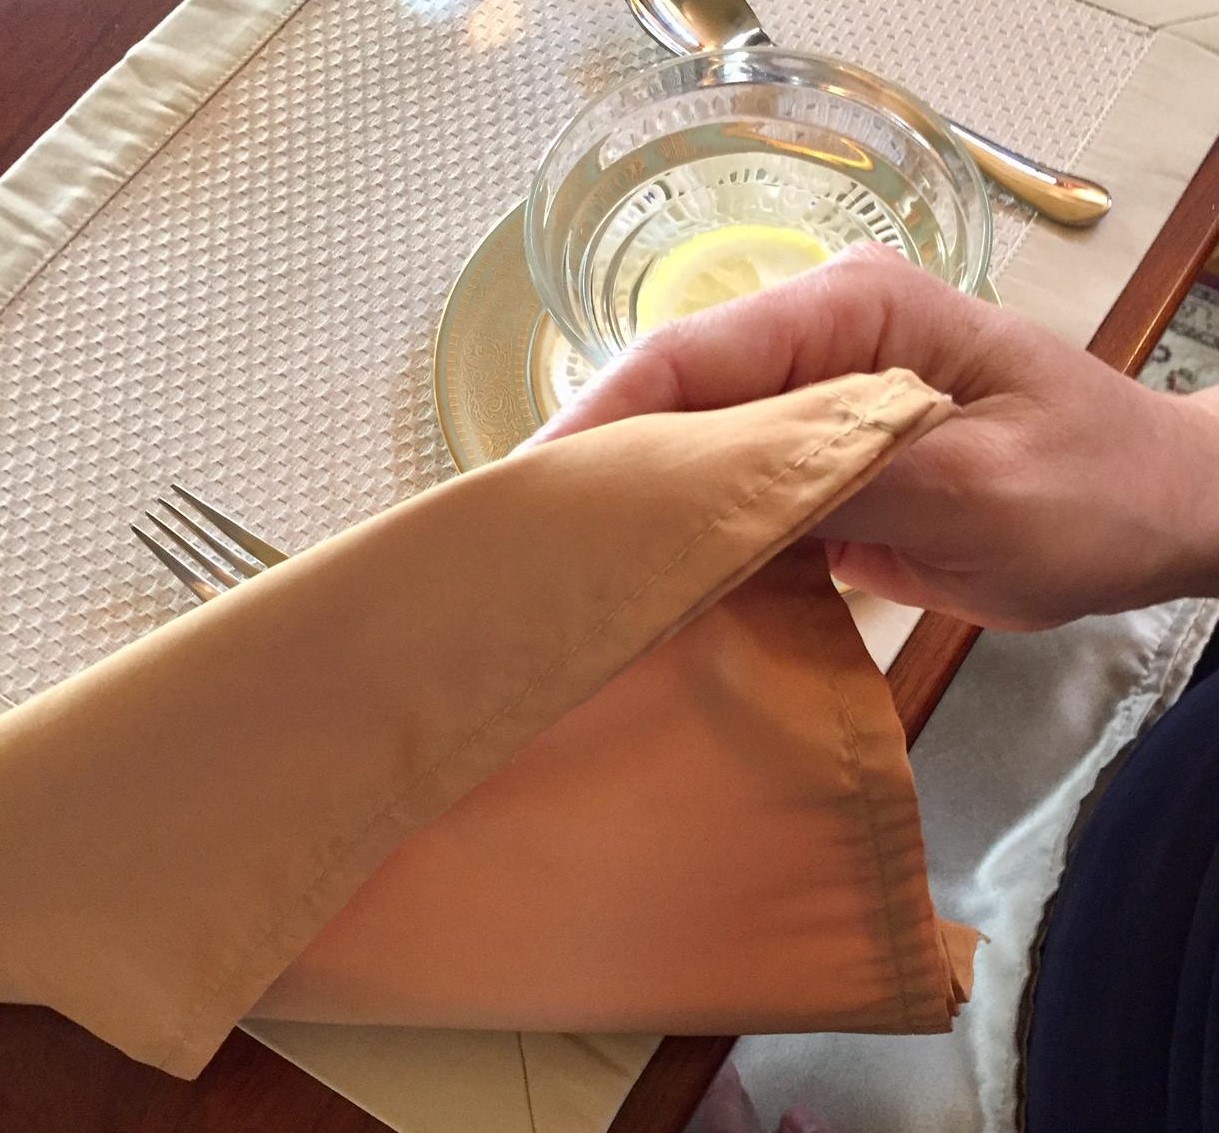 7 Reasons Why You Should Use Cloth Napkins Every Day - Adorn the Table